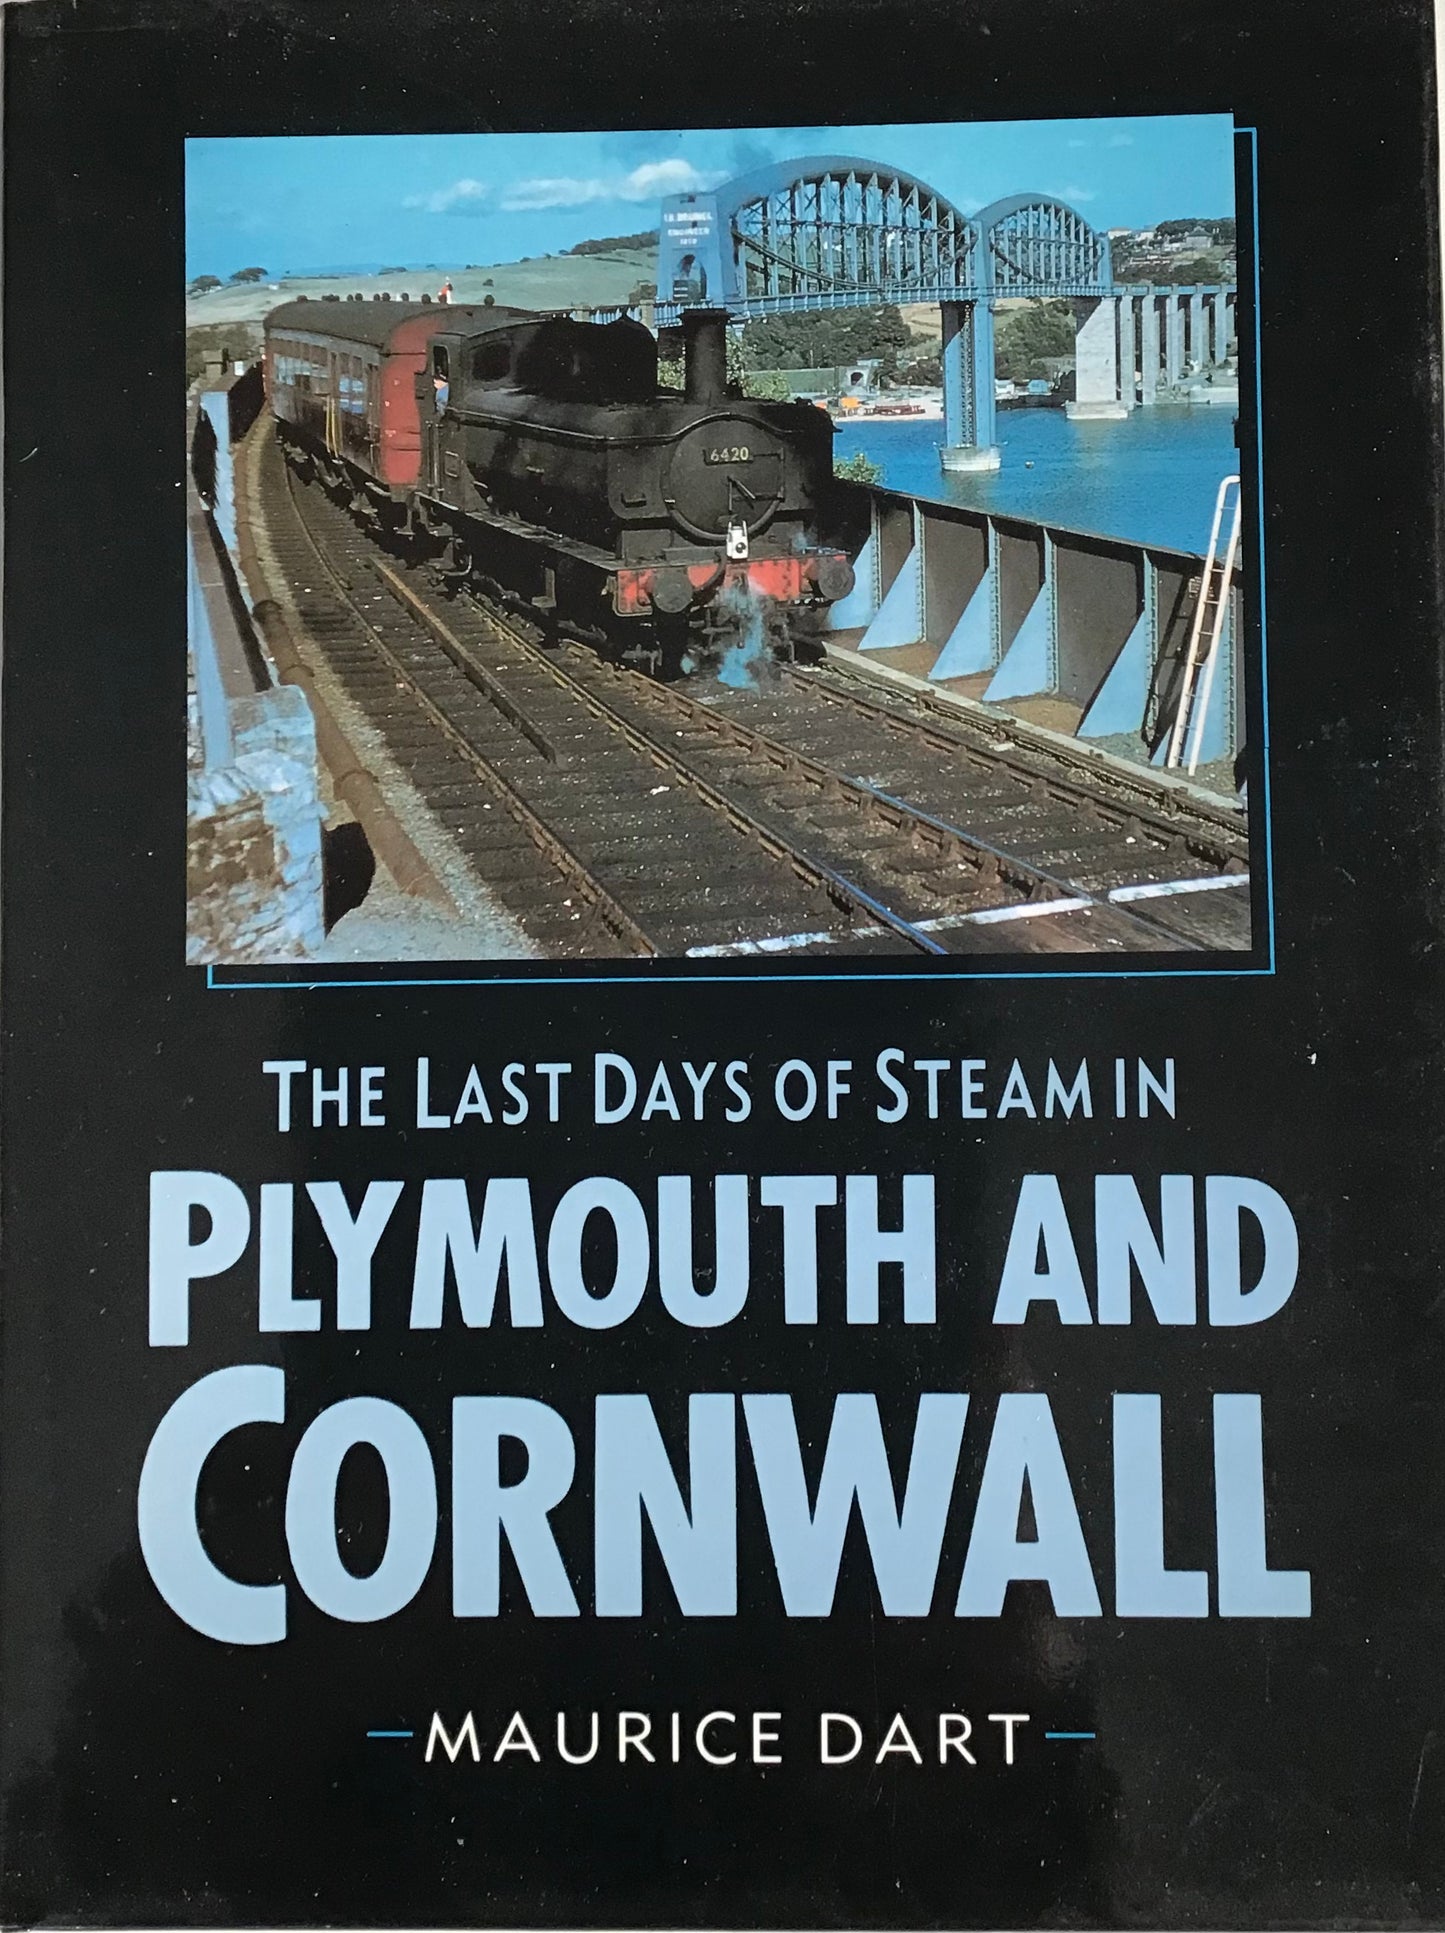 The Last days of steam in Plymouth and Cornwall - Maurice Dart - Chester Model Centre